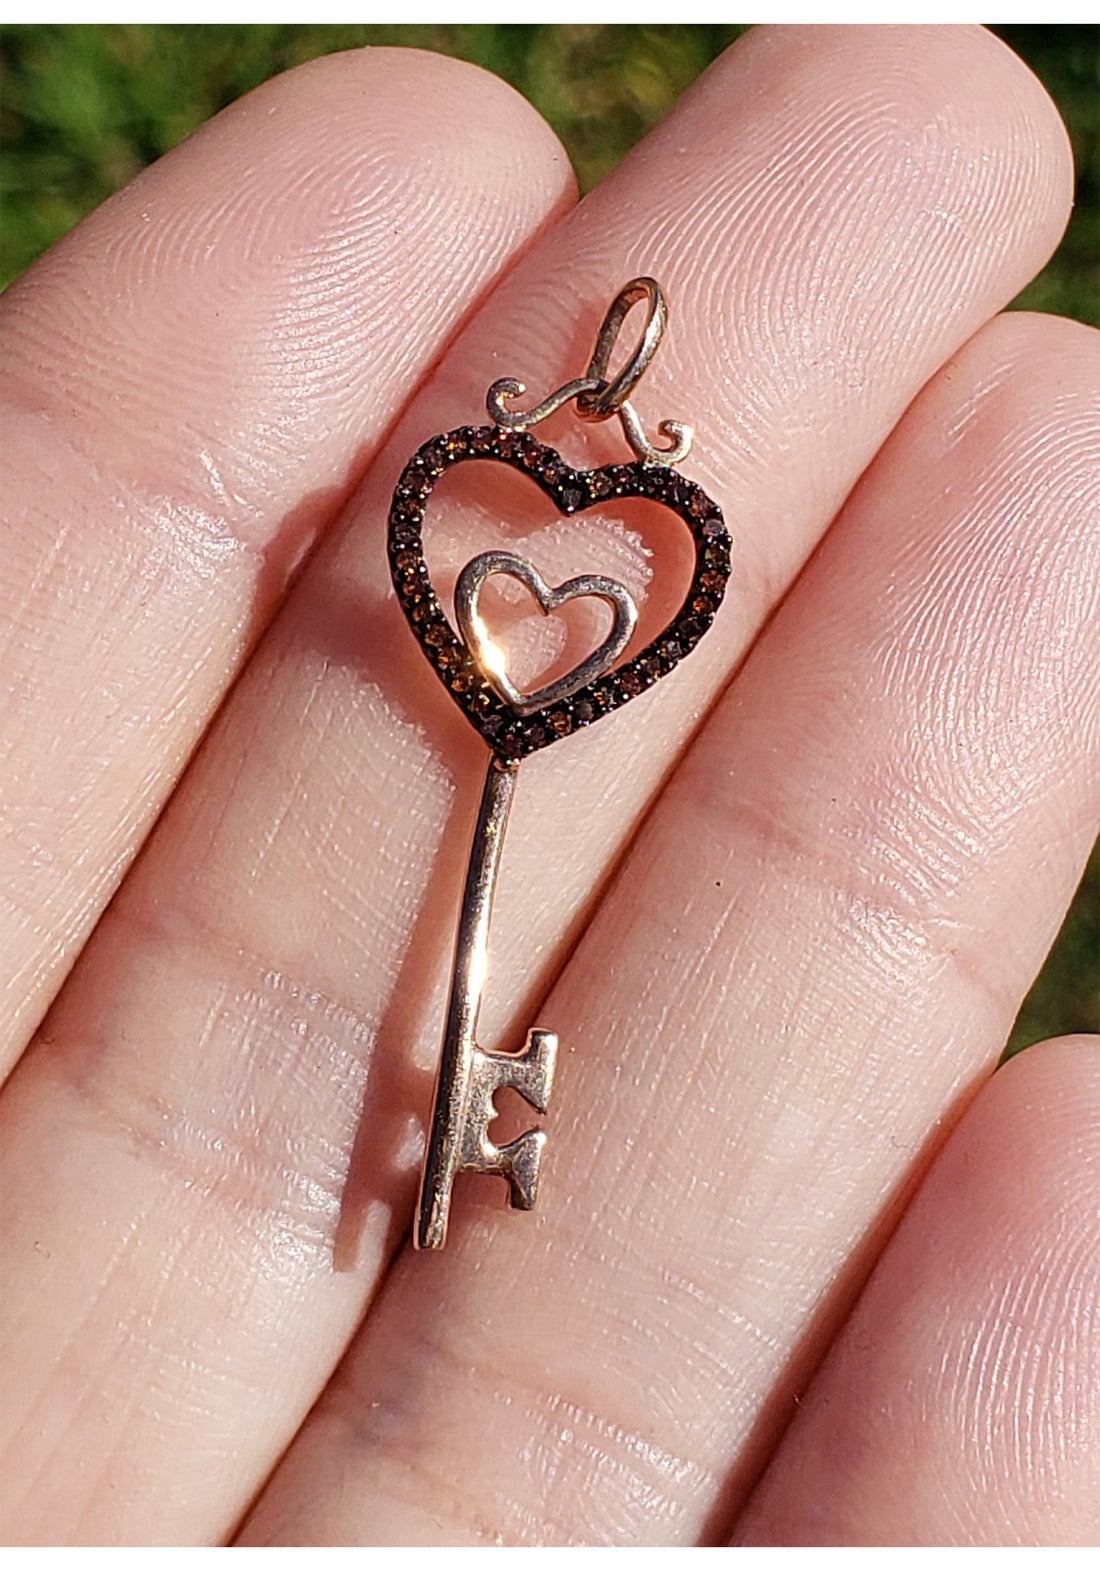 10k Rose Gold with Red Diamond Heart Key Pendant 2